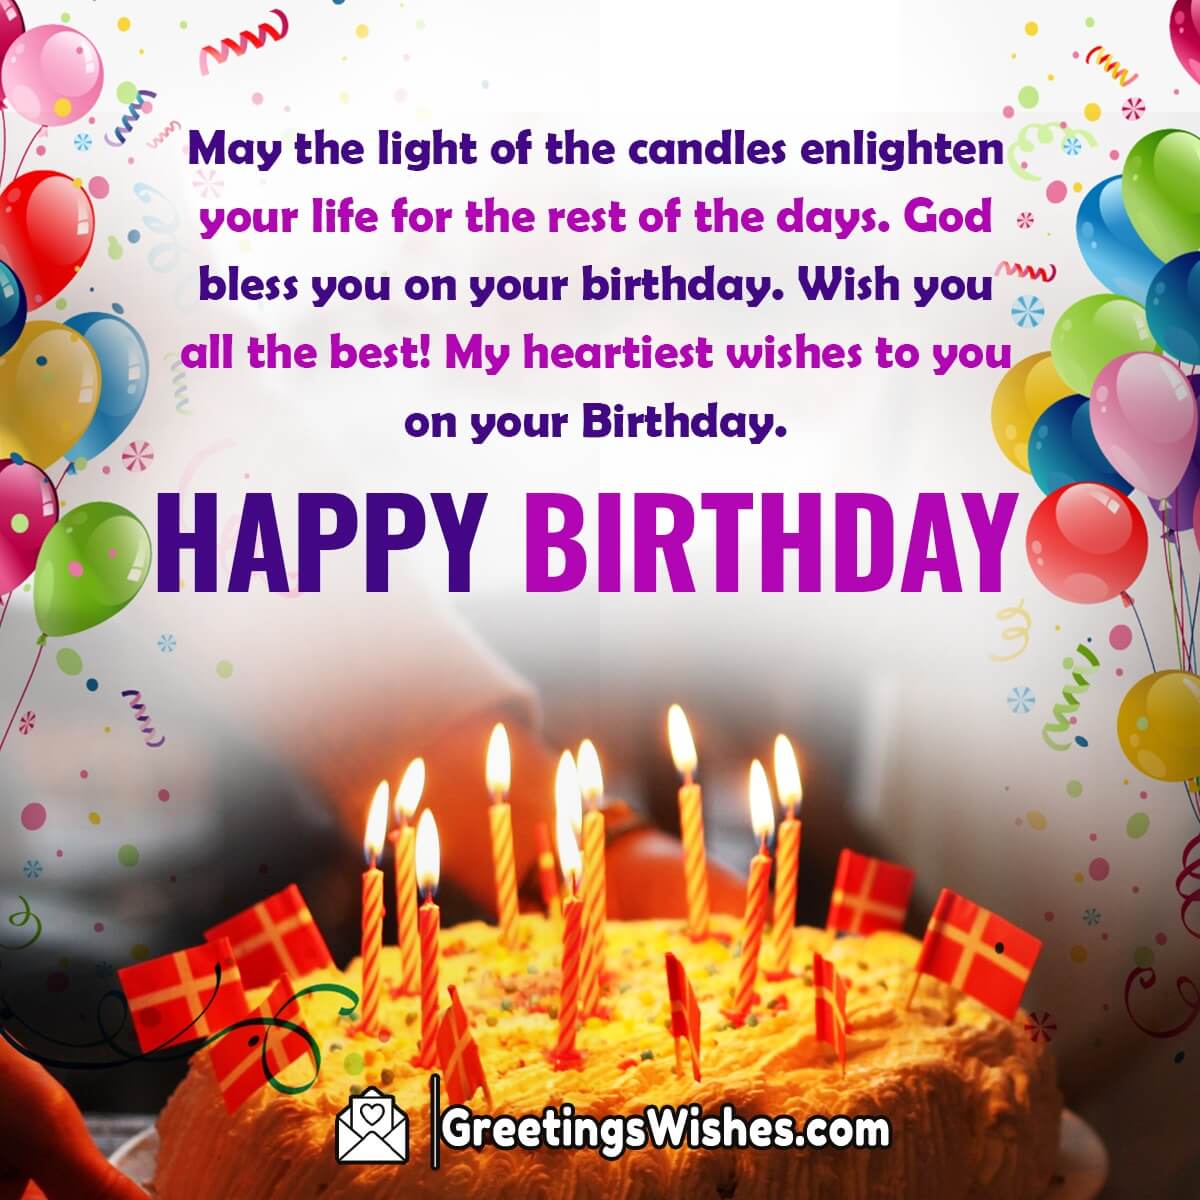 Happy Birthday Wishes - Greetings Wishes